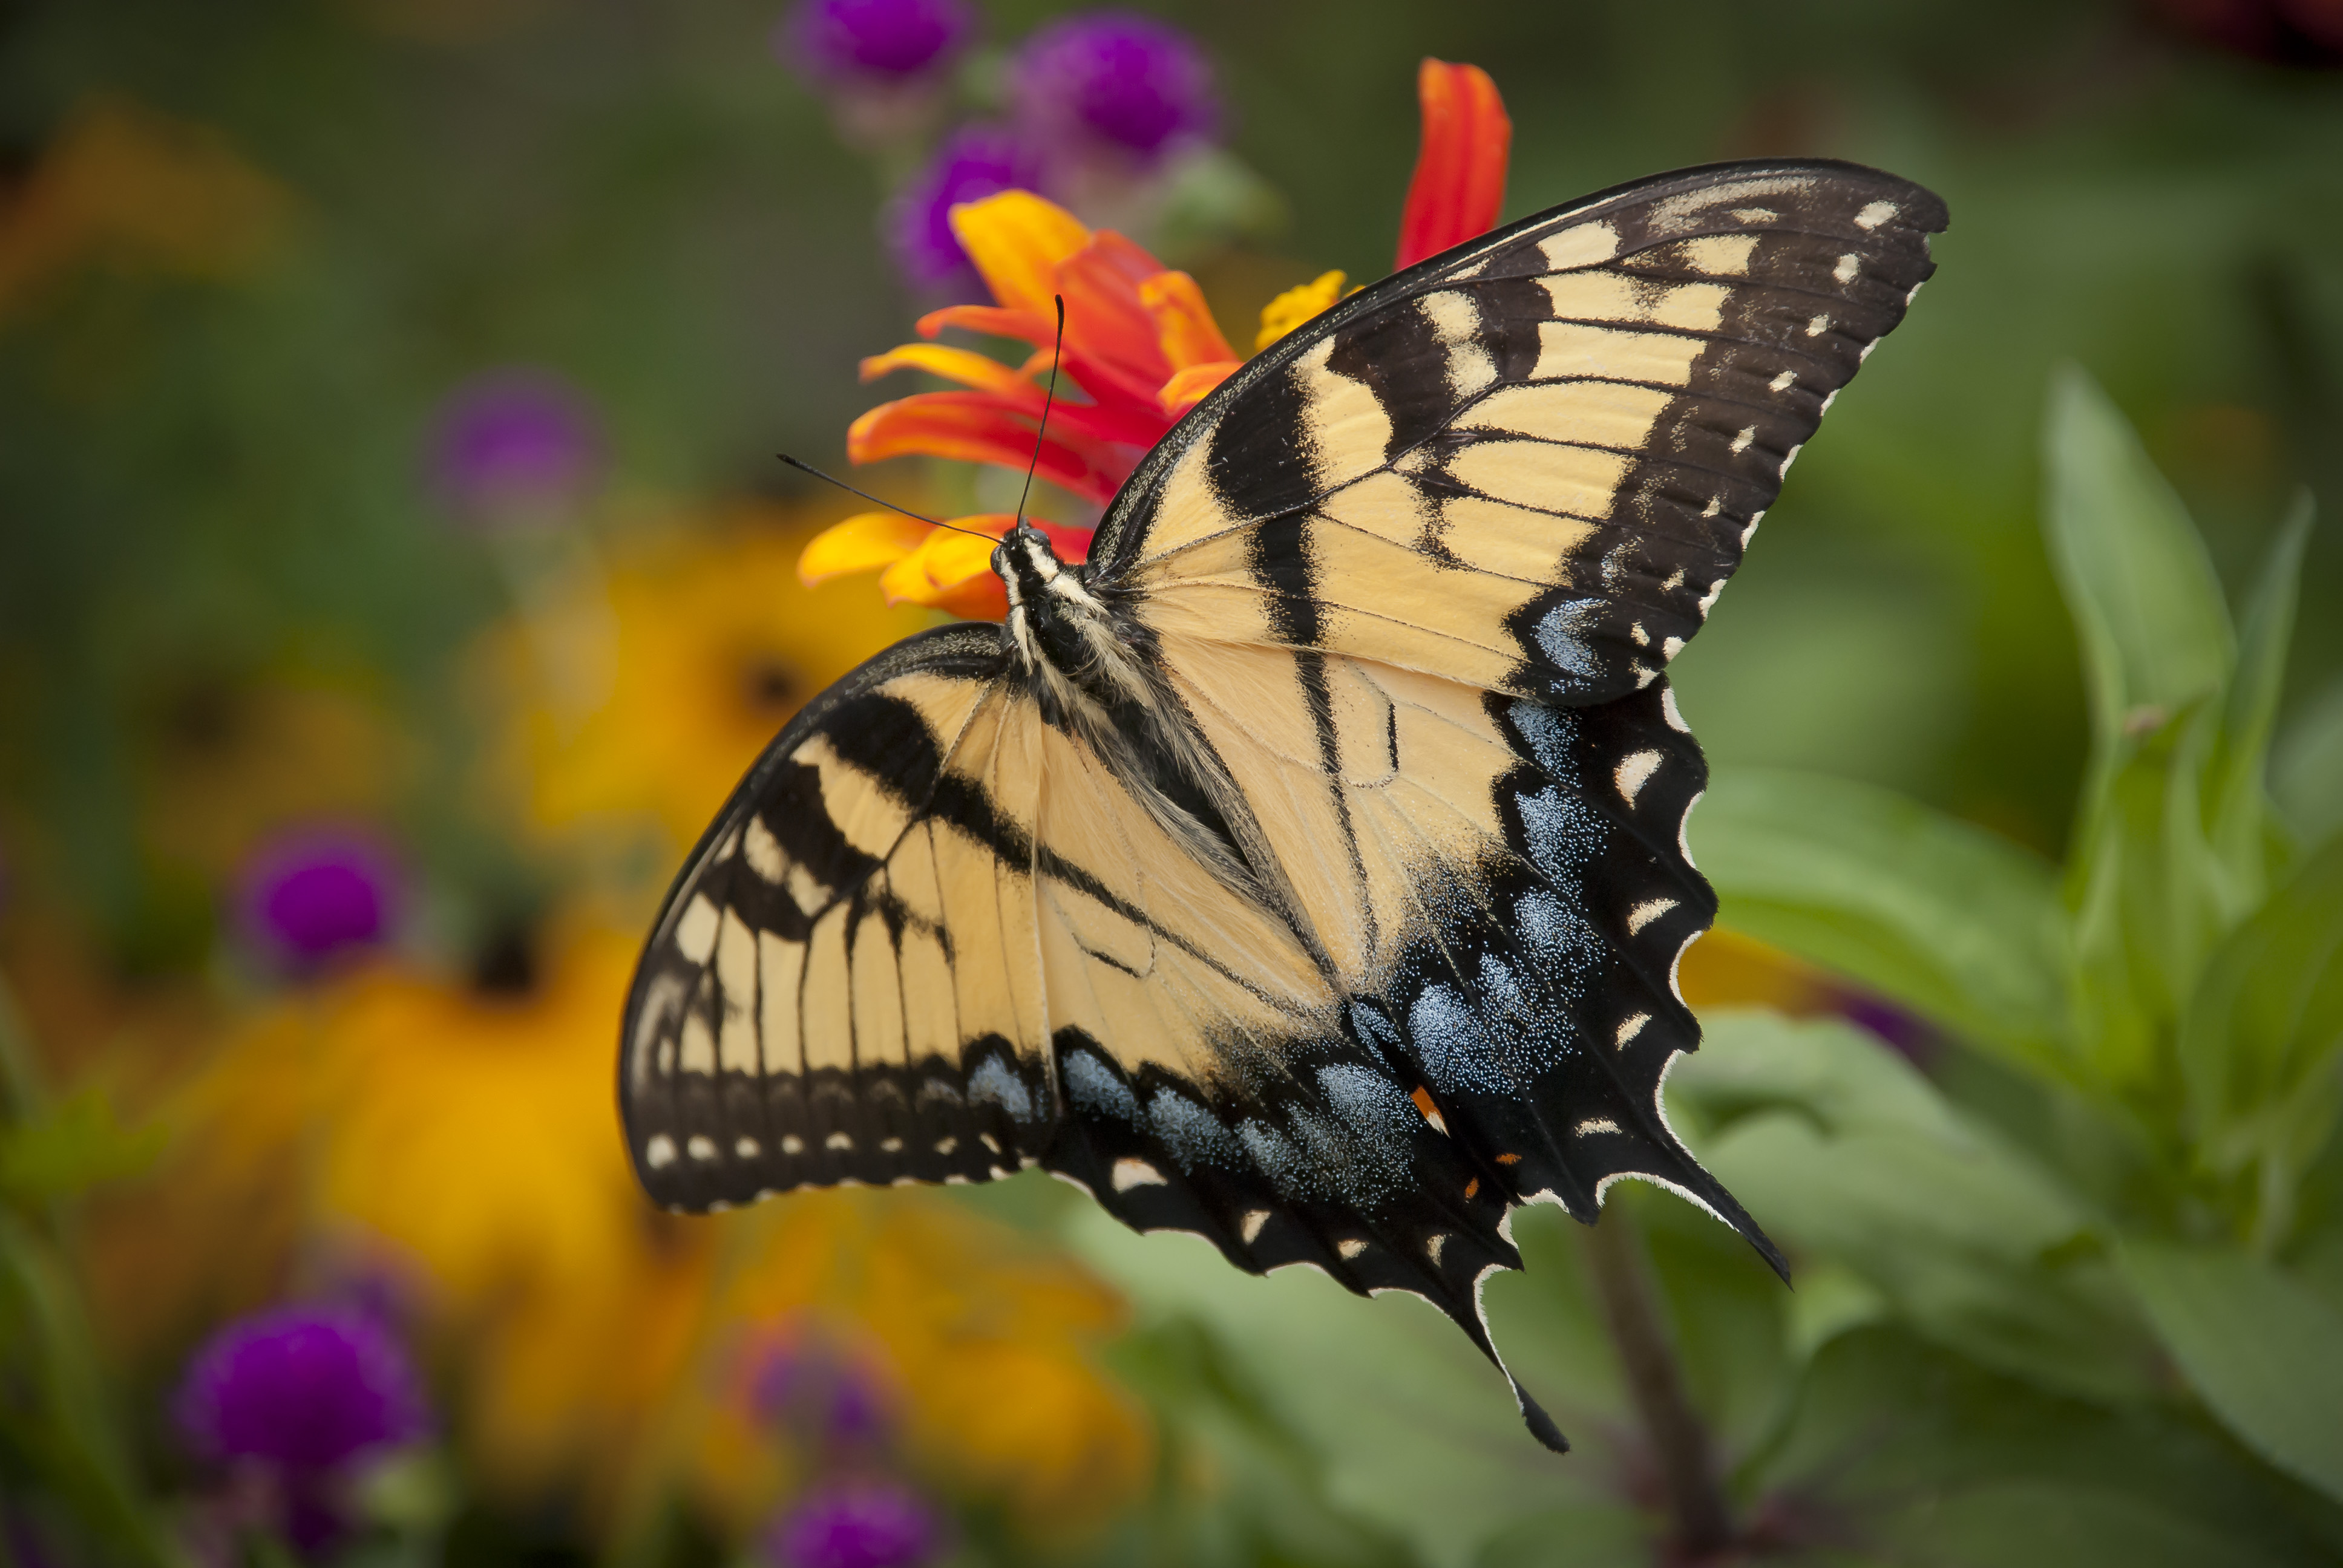 A yellow and black butterfly sits on an orange flower.